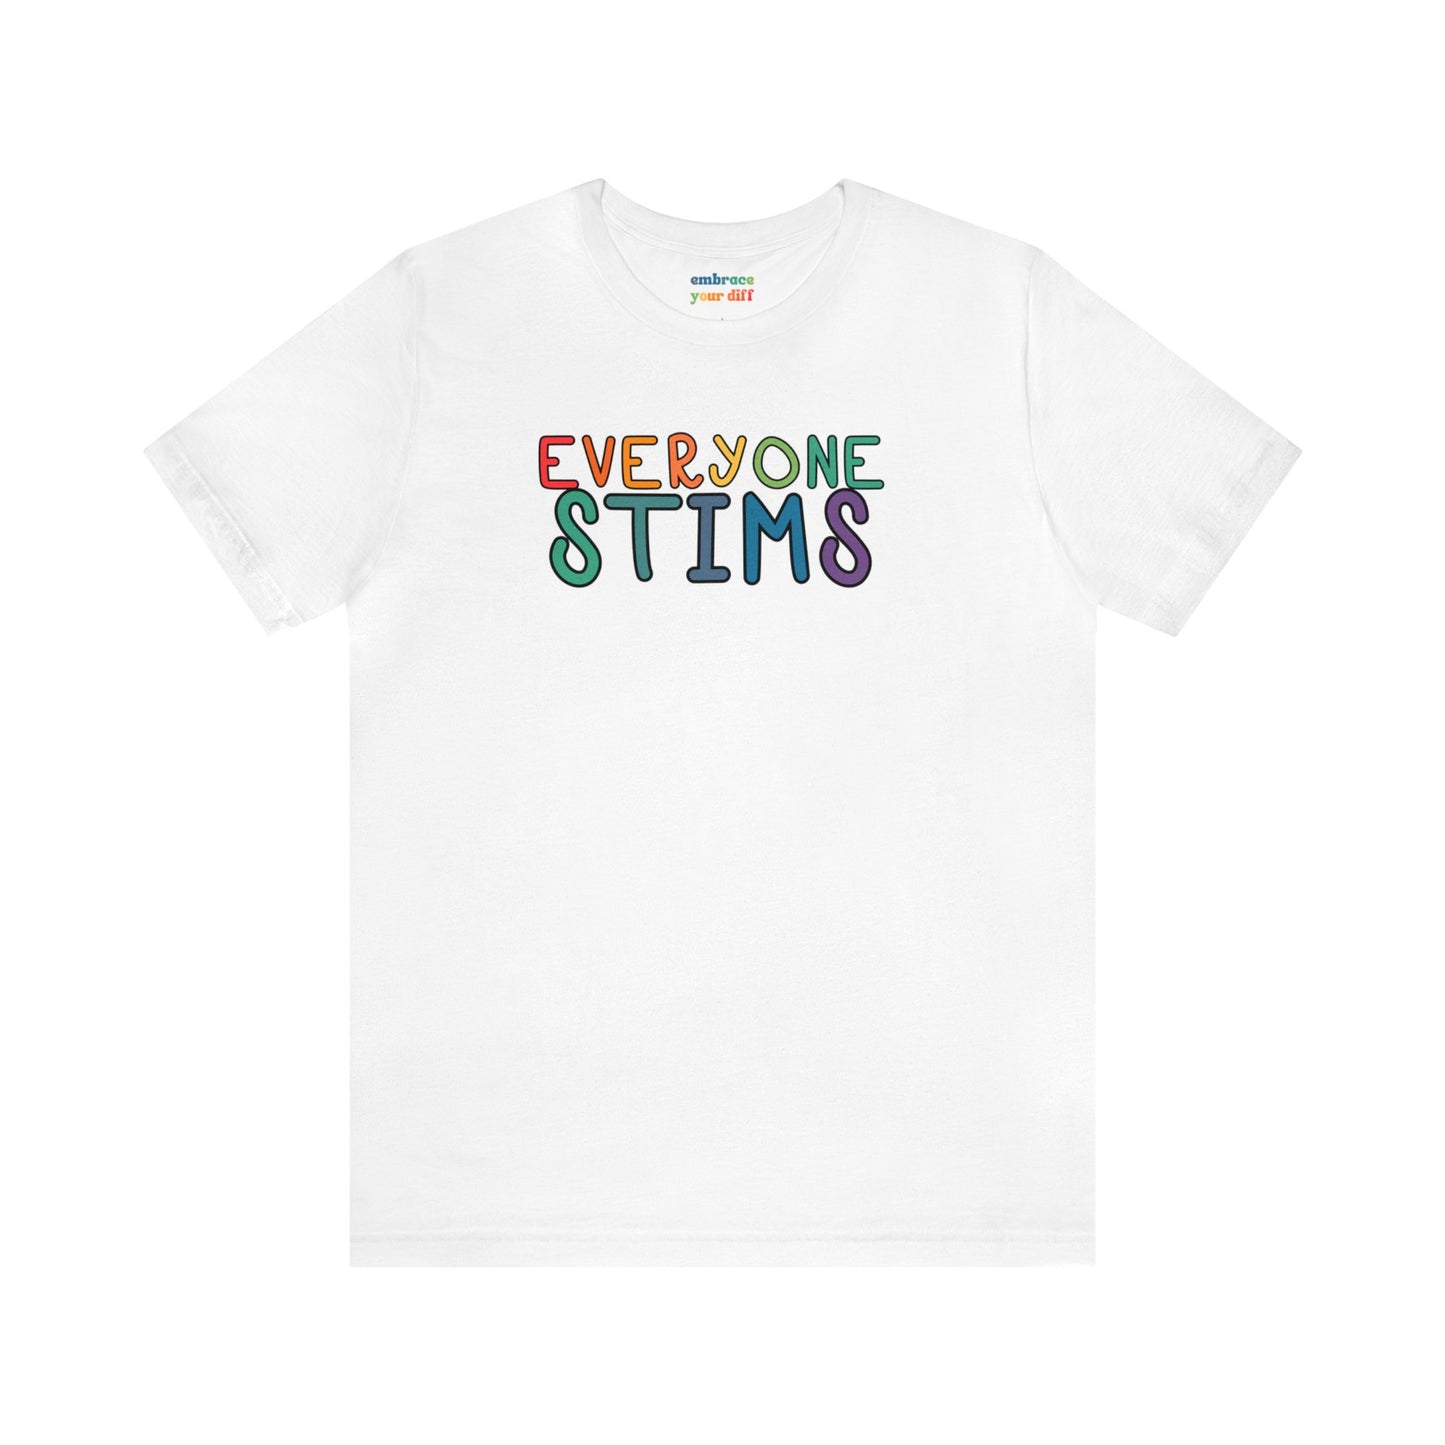 Neurodiversity Inclusion T-Shirt - Everyone Stims Tshirt - Embrace Your Diff